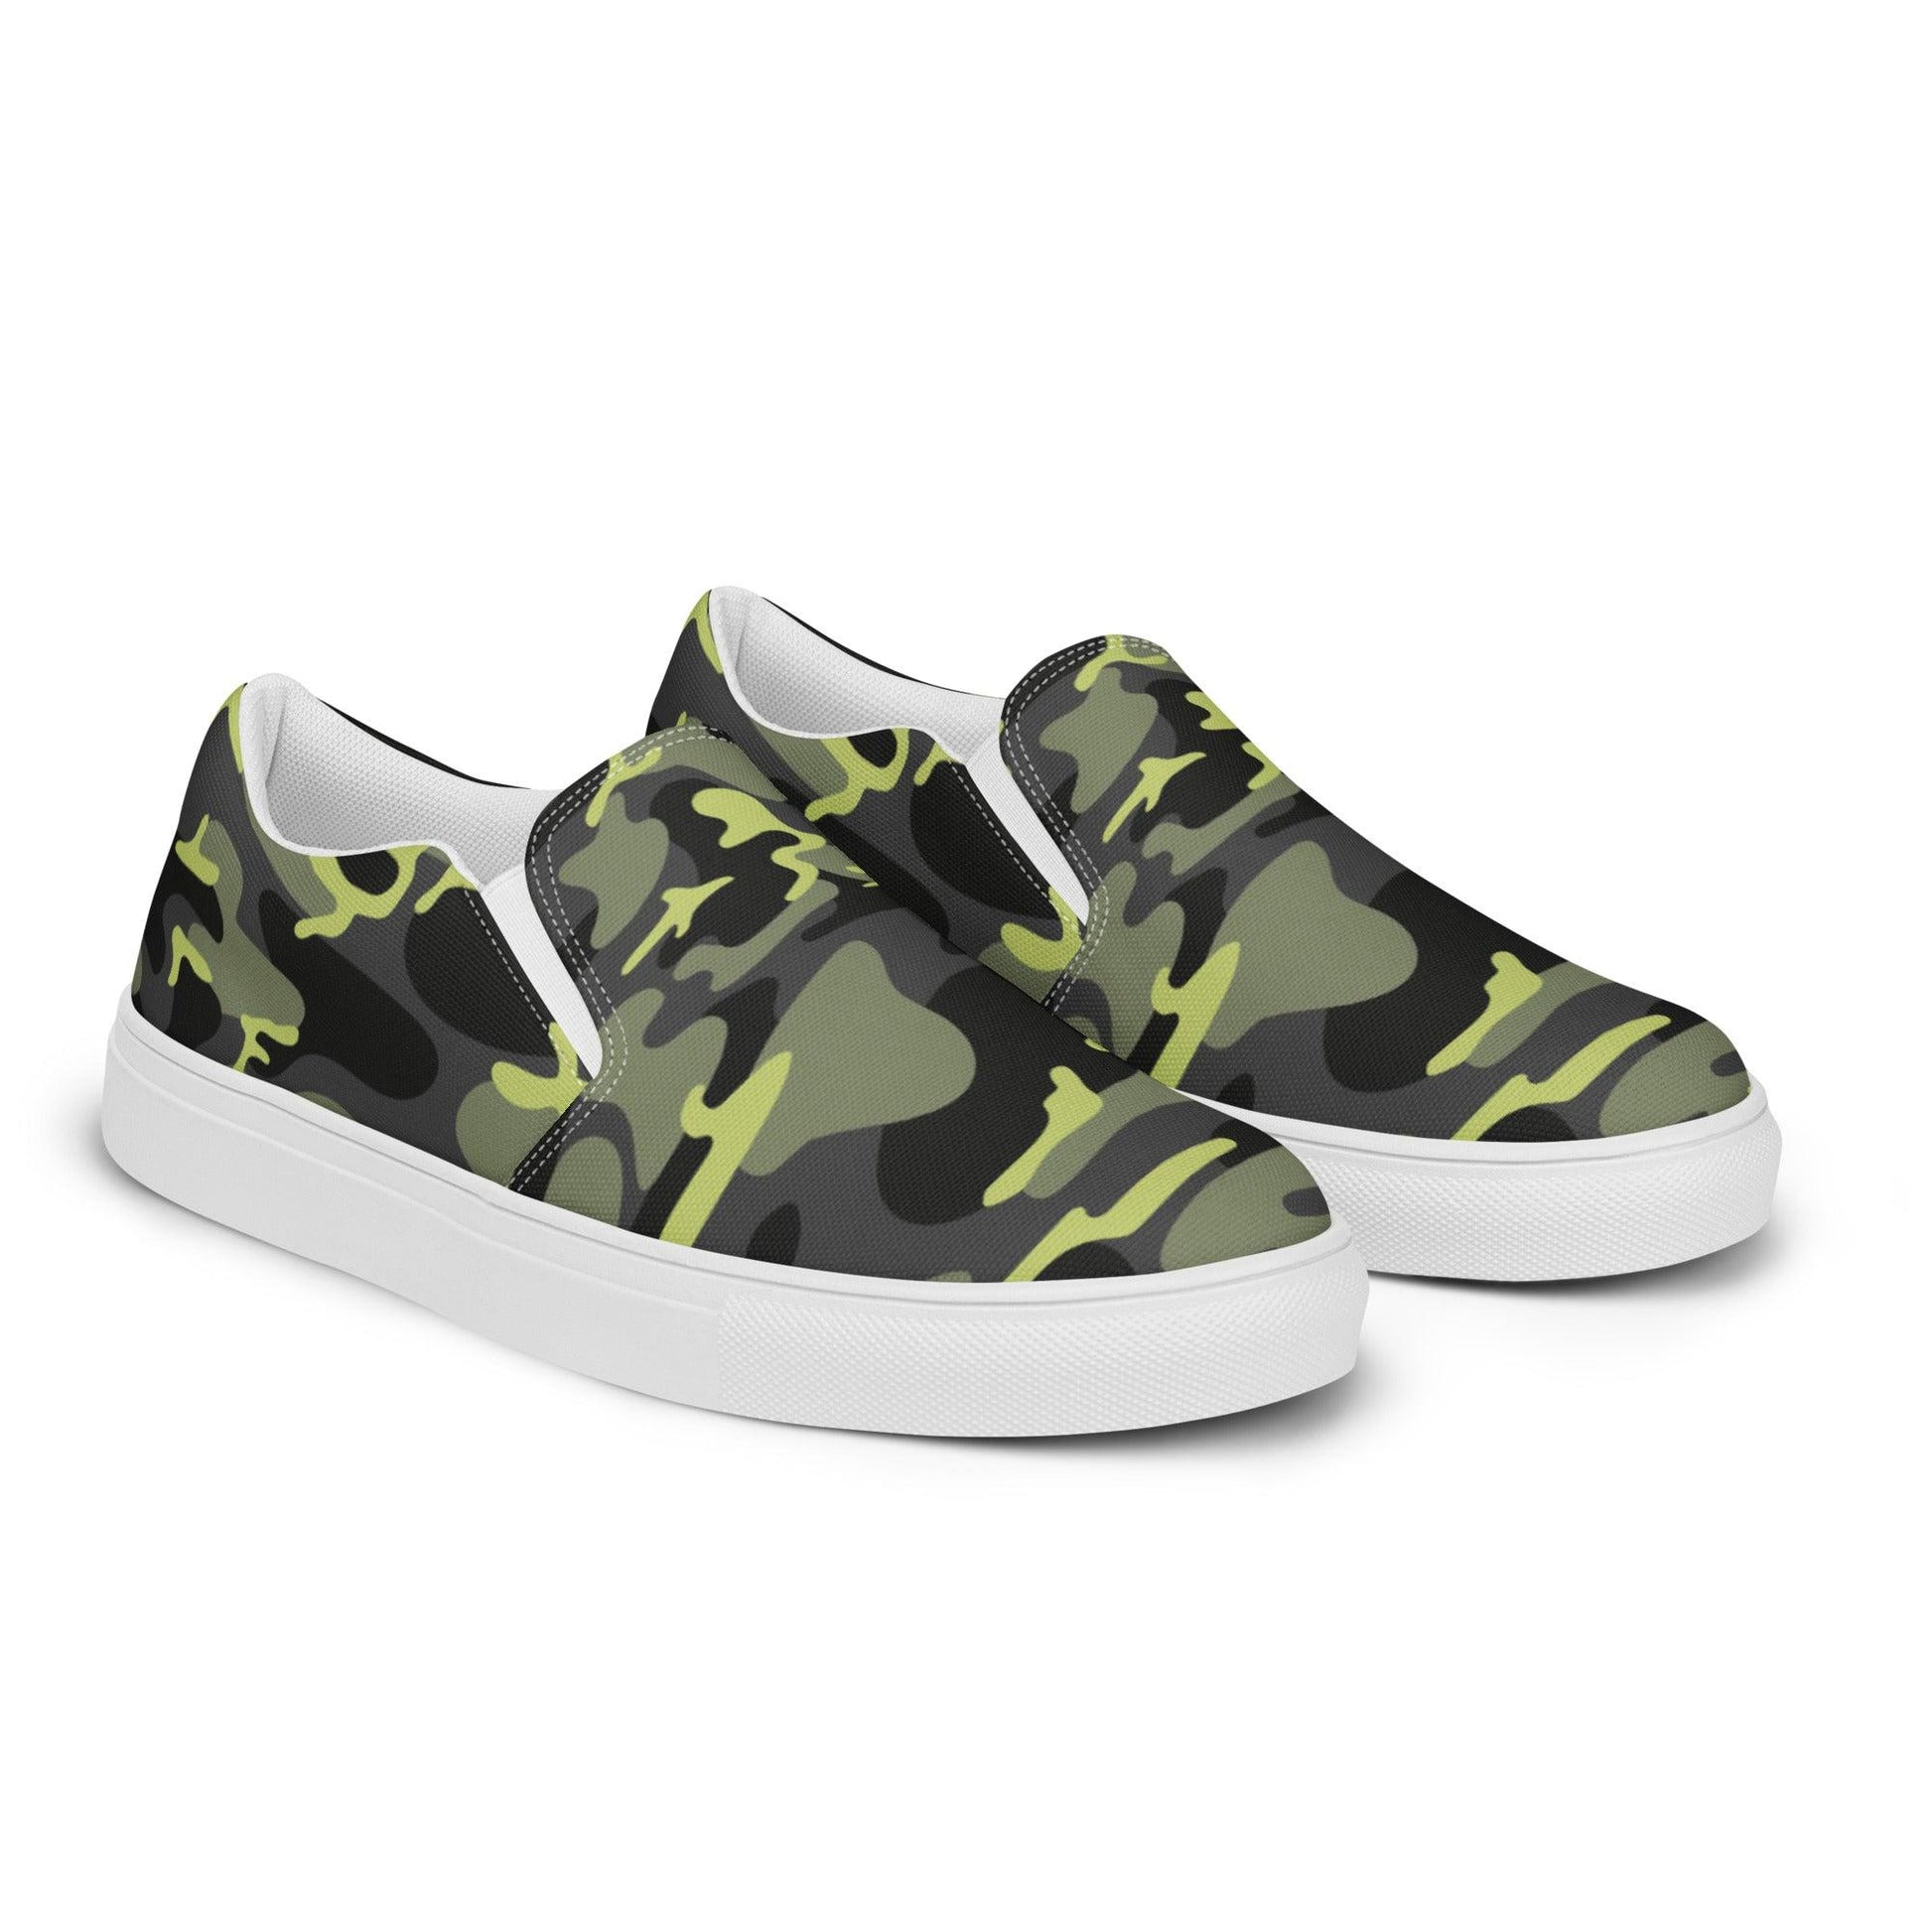 Army green men’s slip-on shoes | Shoes | Bee Prints